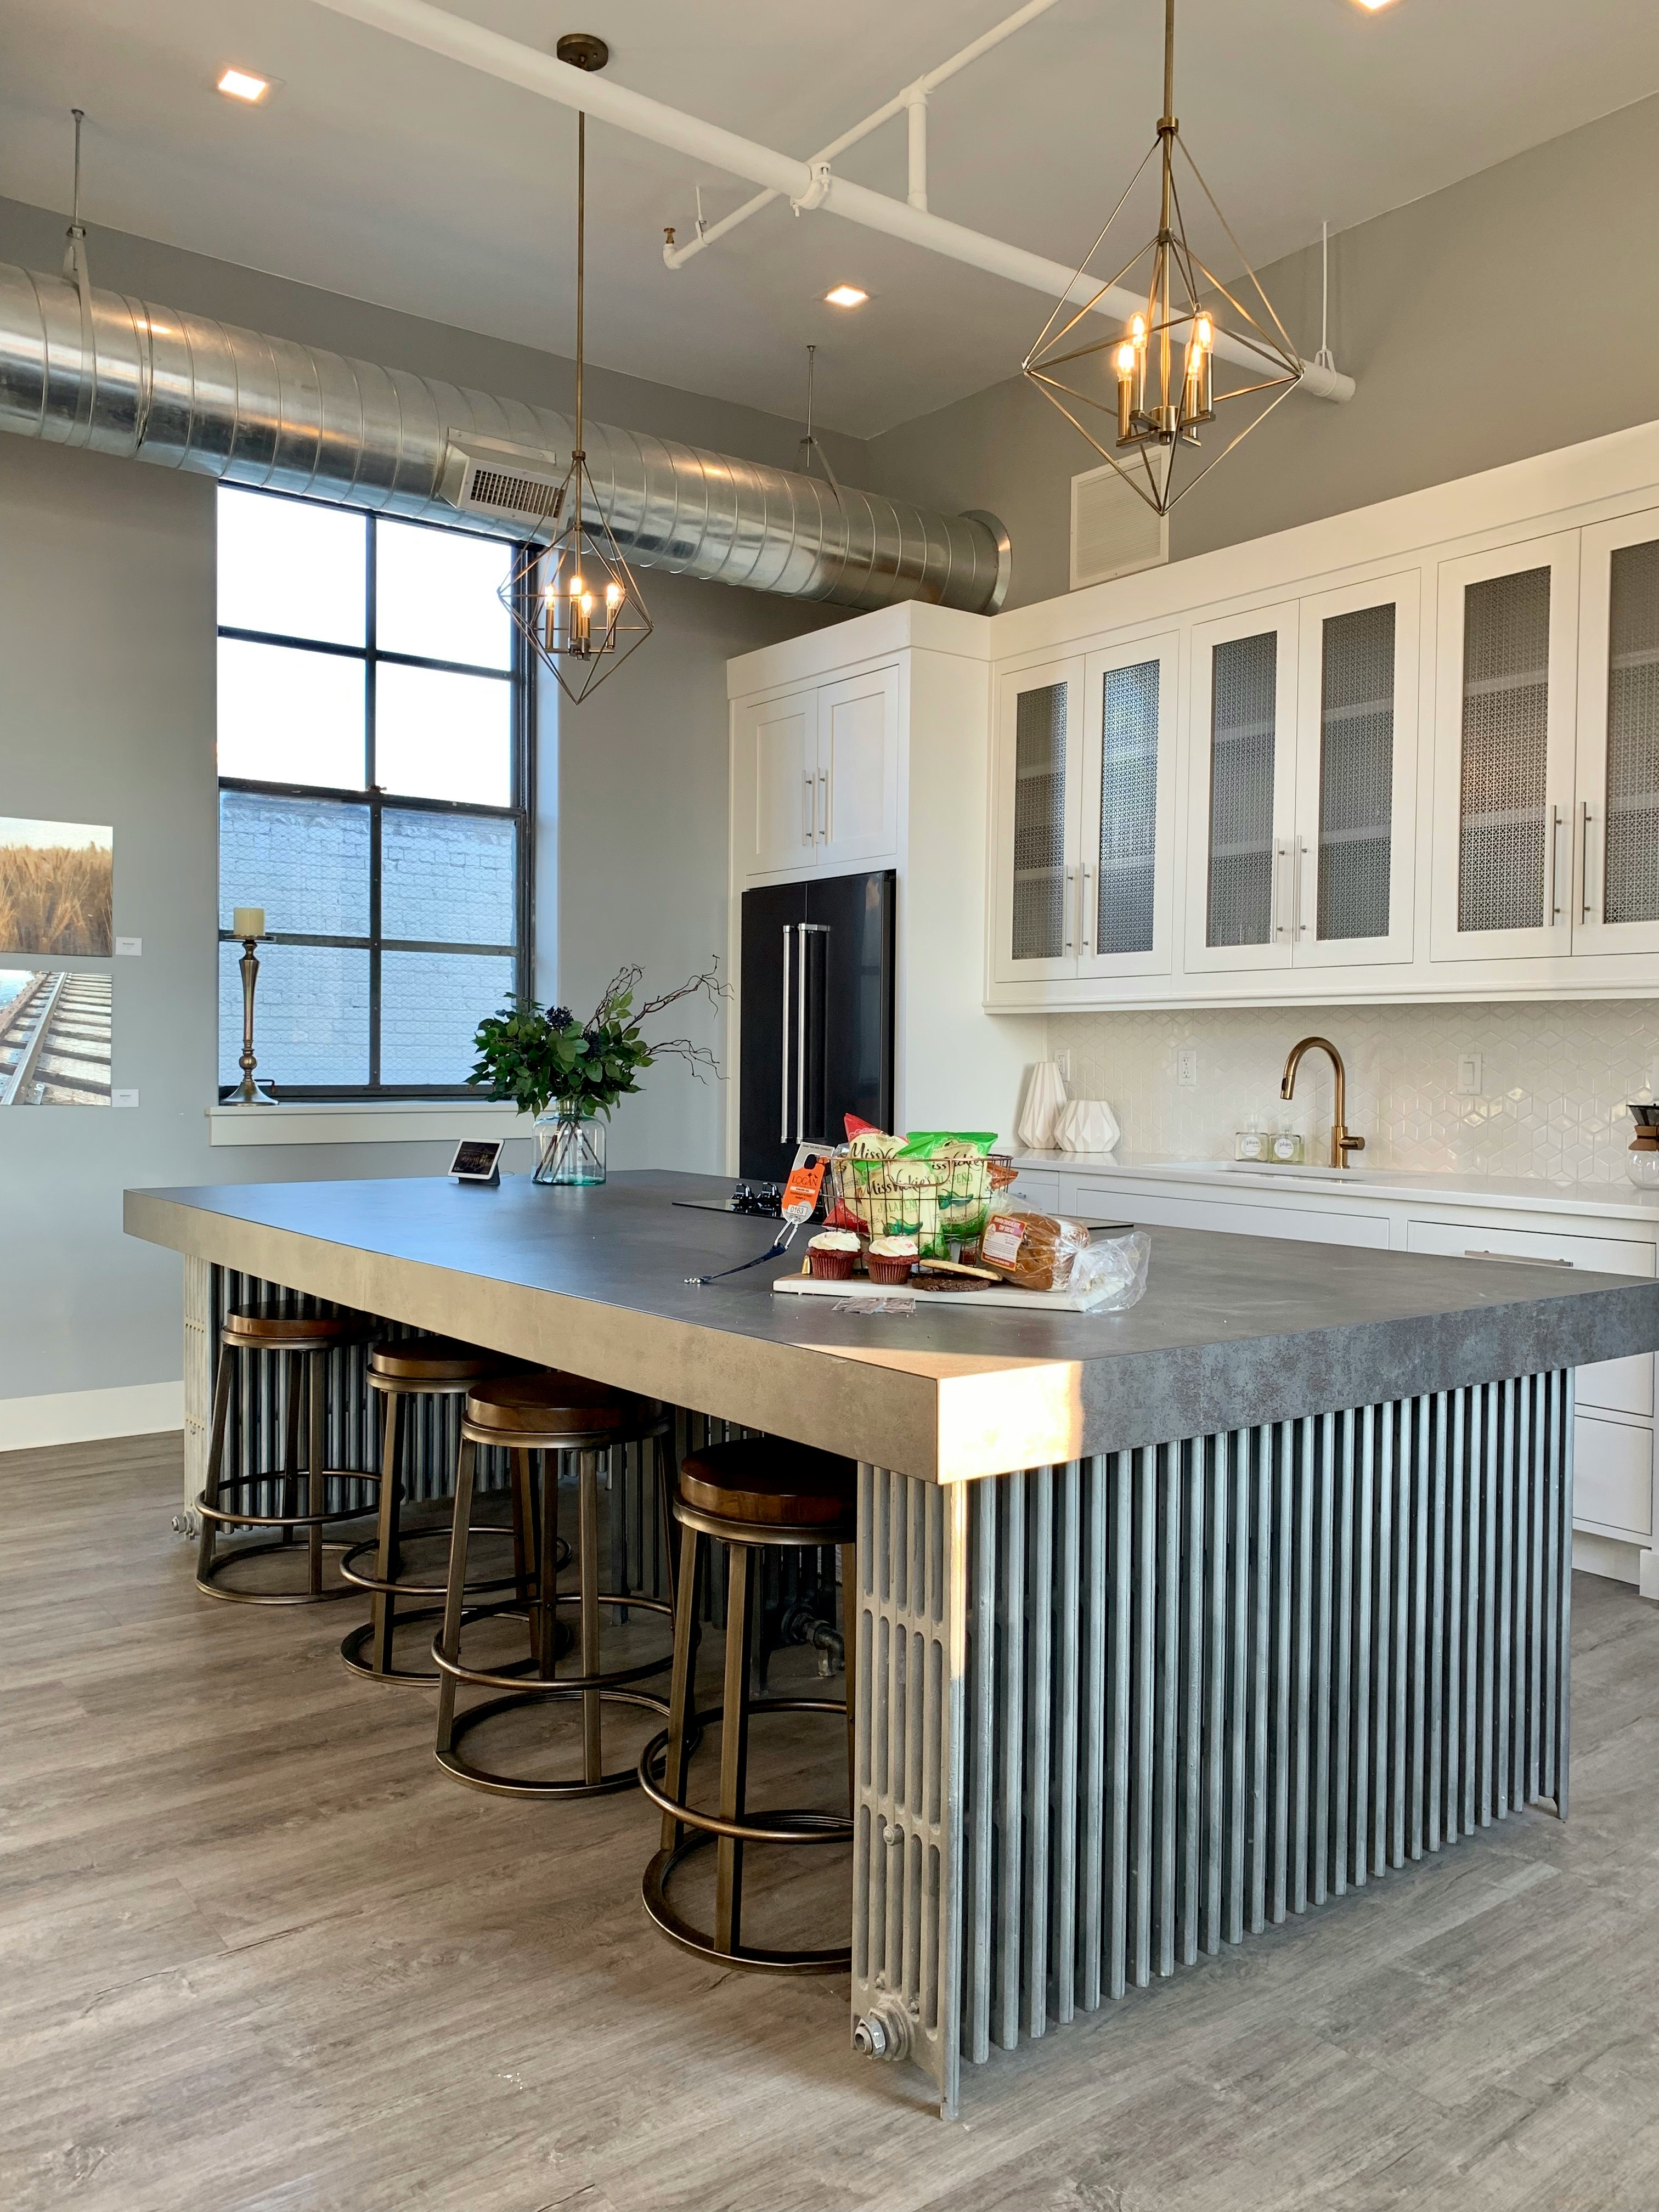 Modern Kitchen Design, Island Seating. 
Chic revitalization for an Industrial building that features the table top, embedded cooktop and supported by radiators native to the building. The perfect blend of historical elements and modern sensibilities. 

Flats Luxury Suites. 22 East Center, Logan Utah. Hotel, Airbnb, Rental Lodging #flatsluxurysuites #loganutah #loganvenues #BoutiqueHotel

https://www.instagram.com/AwCreativeUT/
https://www.AwCreativeUT.com/
https://www.citystorageif.com/
#AwCreativeUT #awcreative #AdamWinger Adam Robert Winger 
